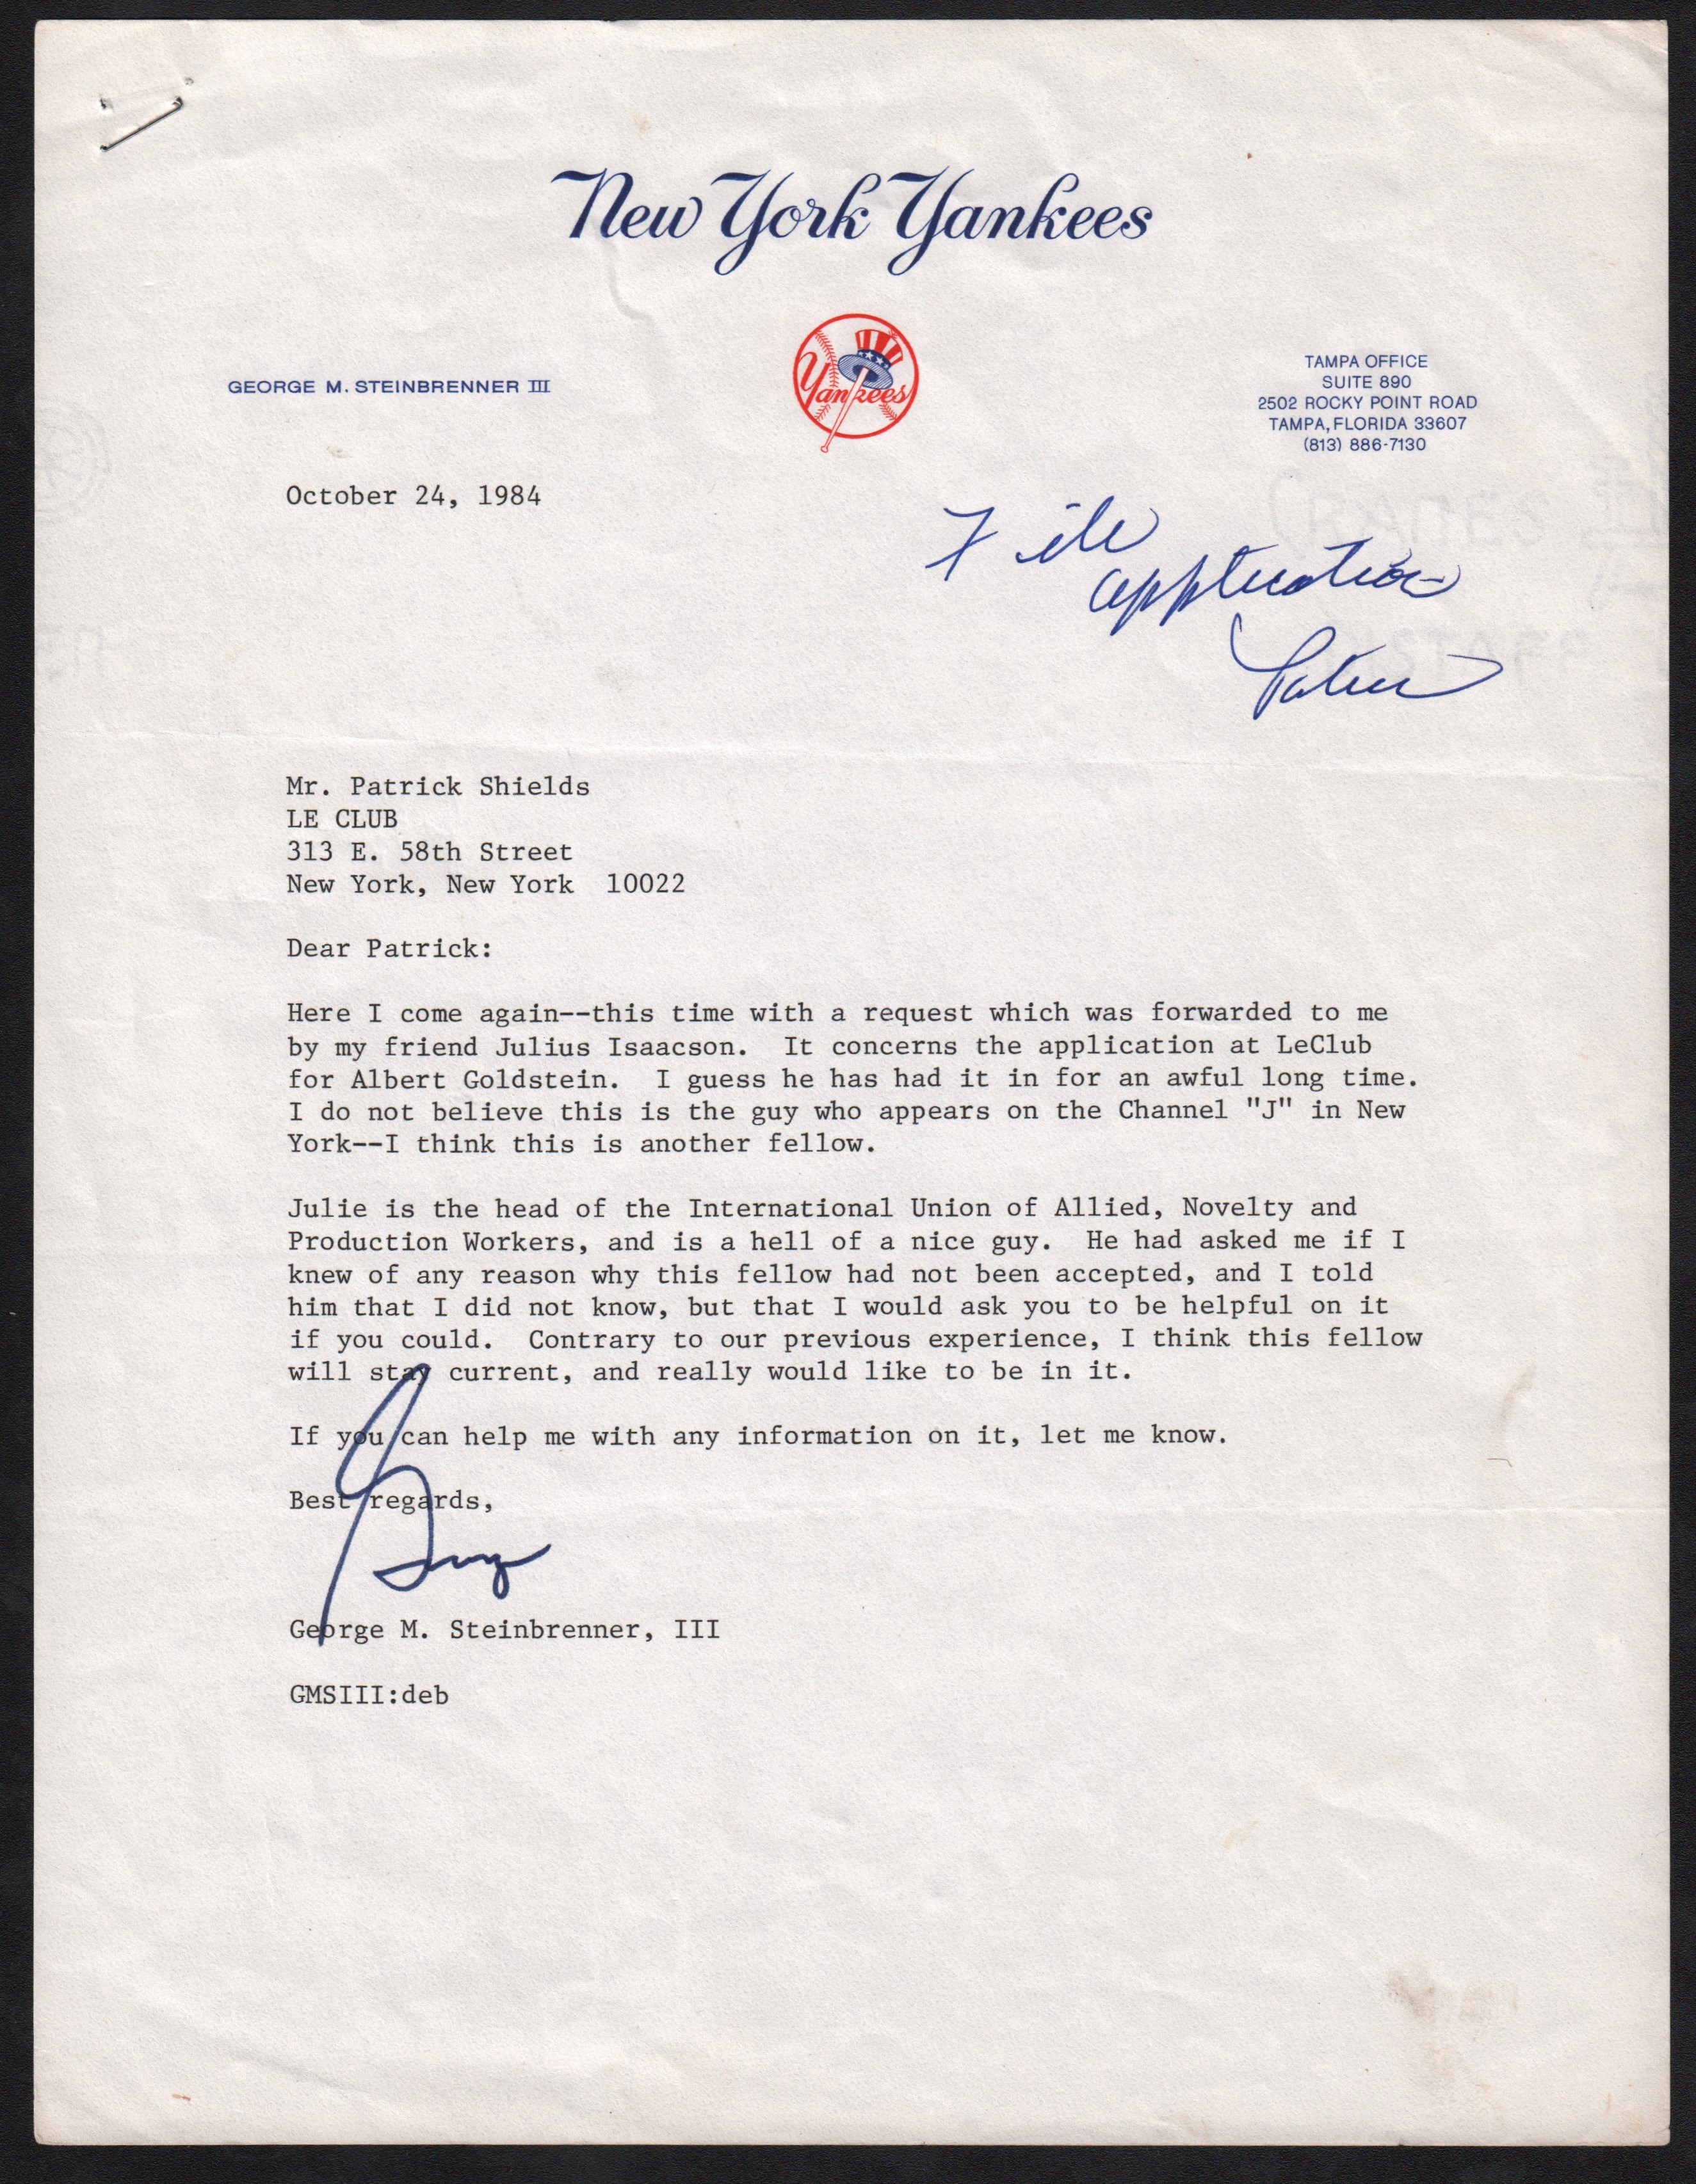 Yankees - 1984 George Steinbrenner Signed Letter on Yankees Stationary